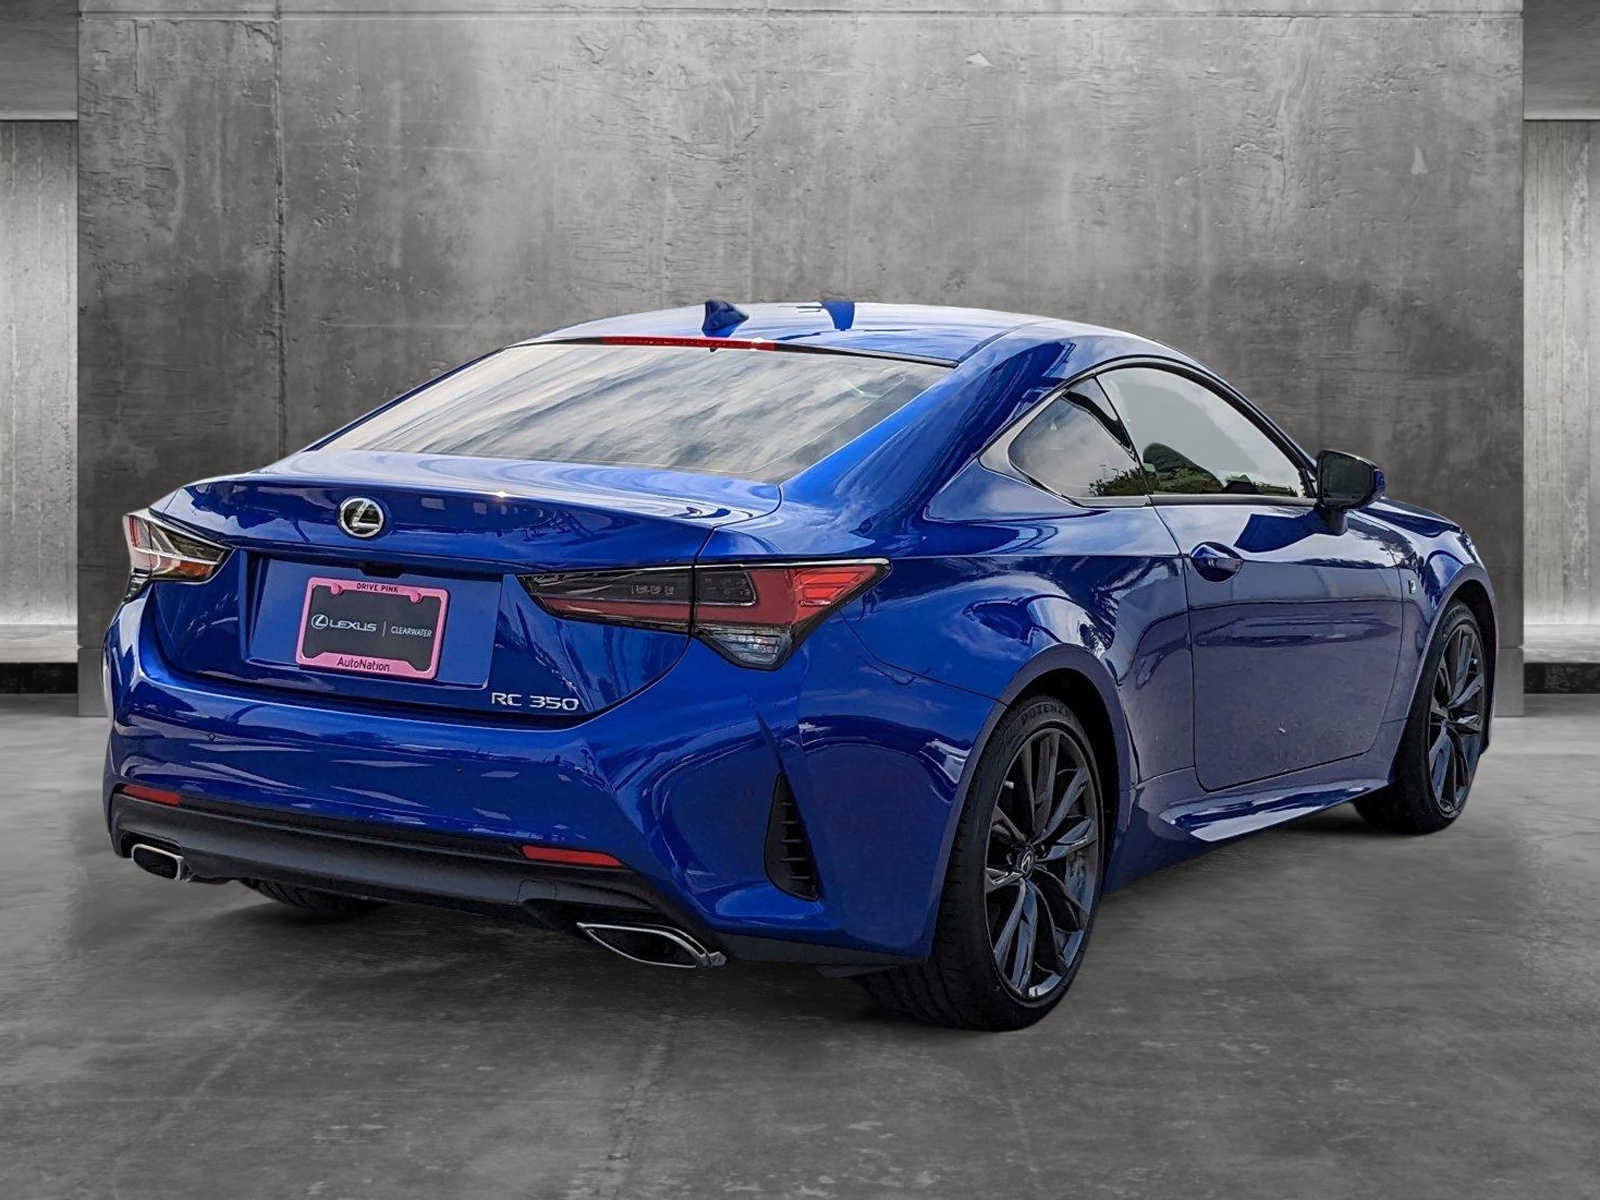 New 2023 Lexus RC 350 F SPORT 2-DR COUPE in Clearwater #P5026518 | Lexus of  Clearwater